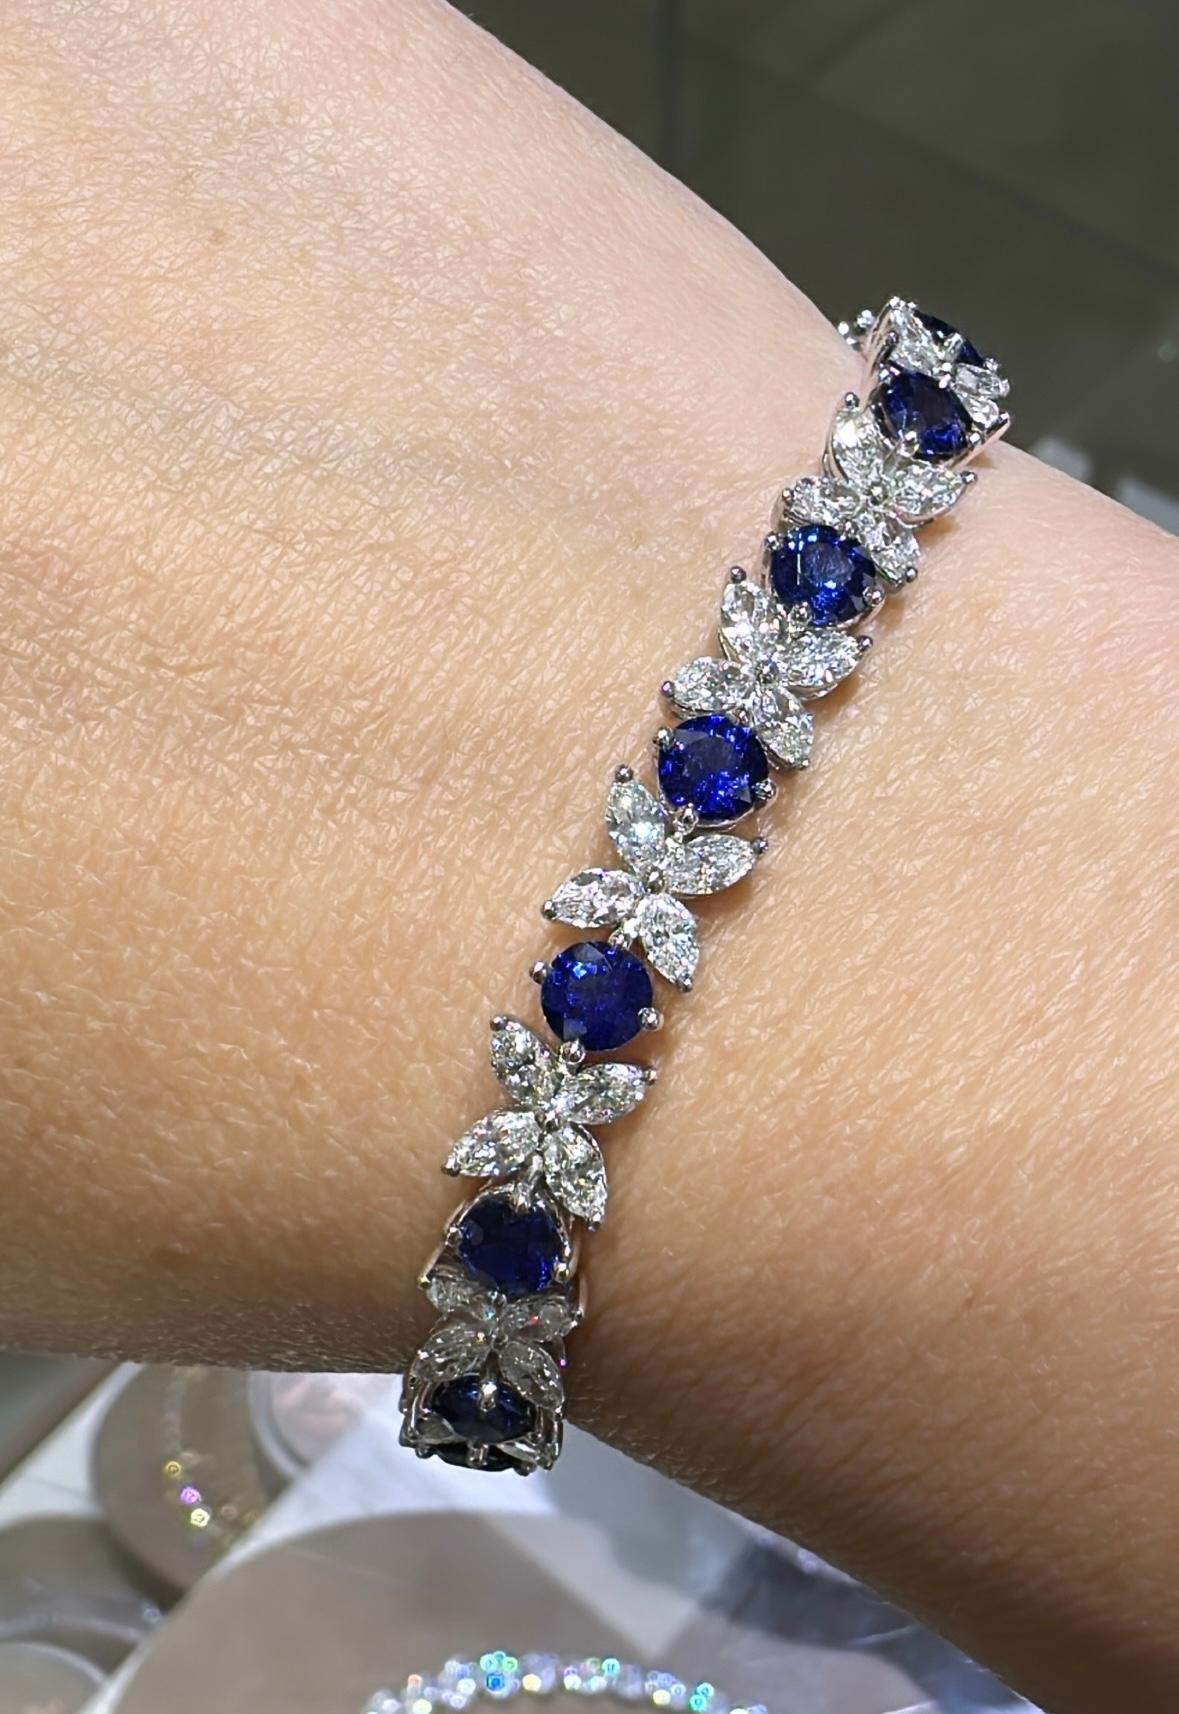 SKU: 126883
Splendid 14.40carats marquise-cut diamond & blue sapphire bracelet will make her shine with glory once you put it on her wrist. Absolutely gorgeous setting and with marquise- cut diamonds and round shape royal blue sapphires will sit